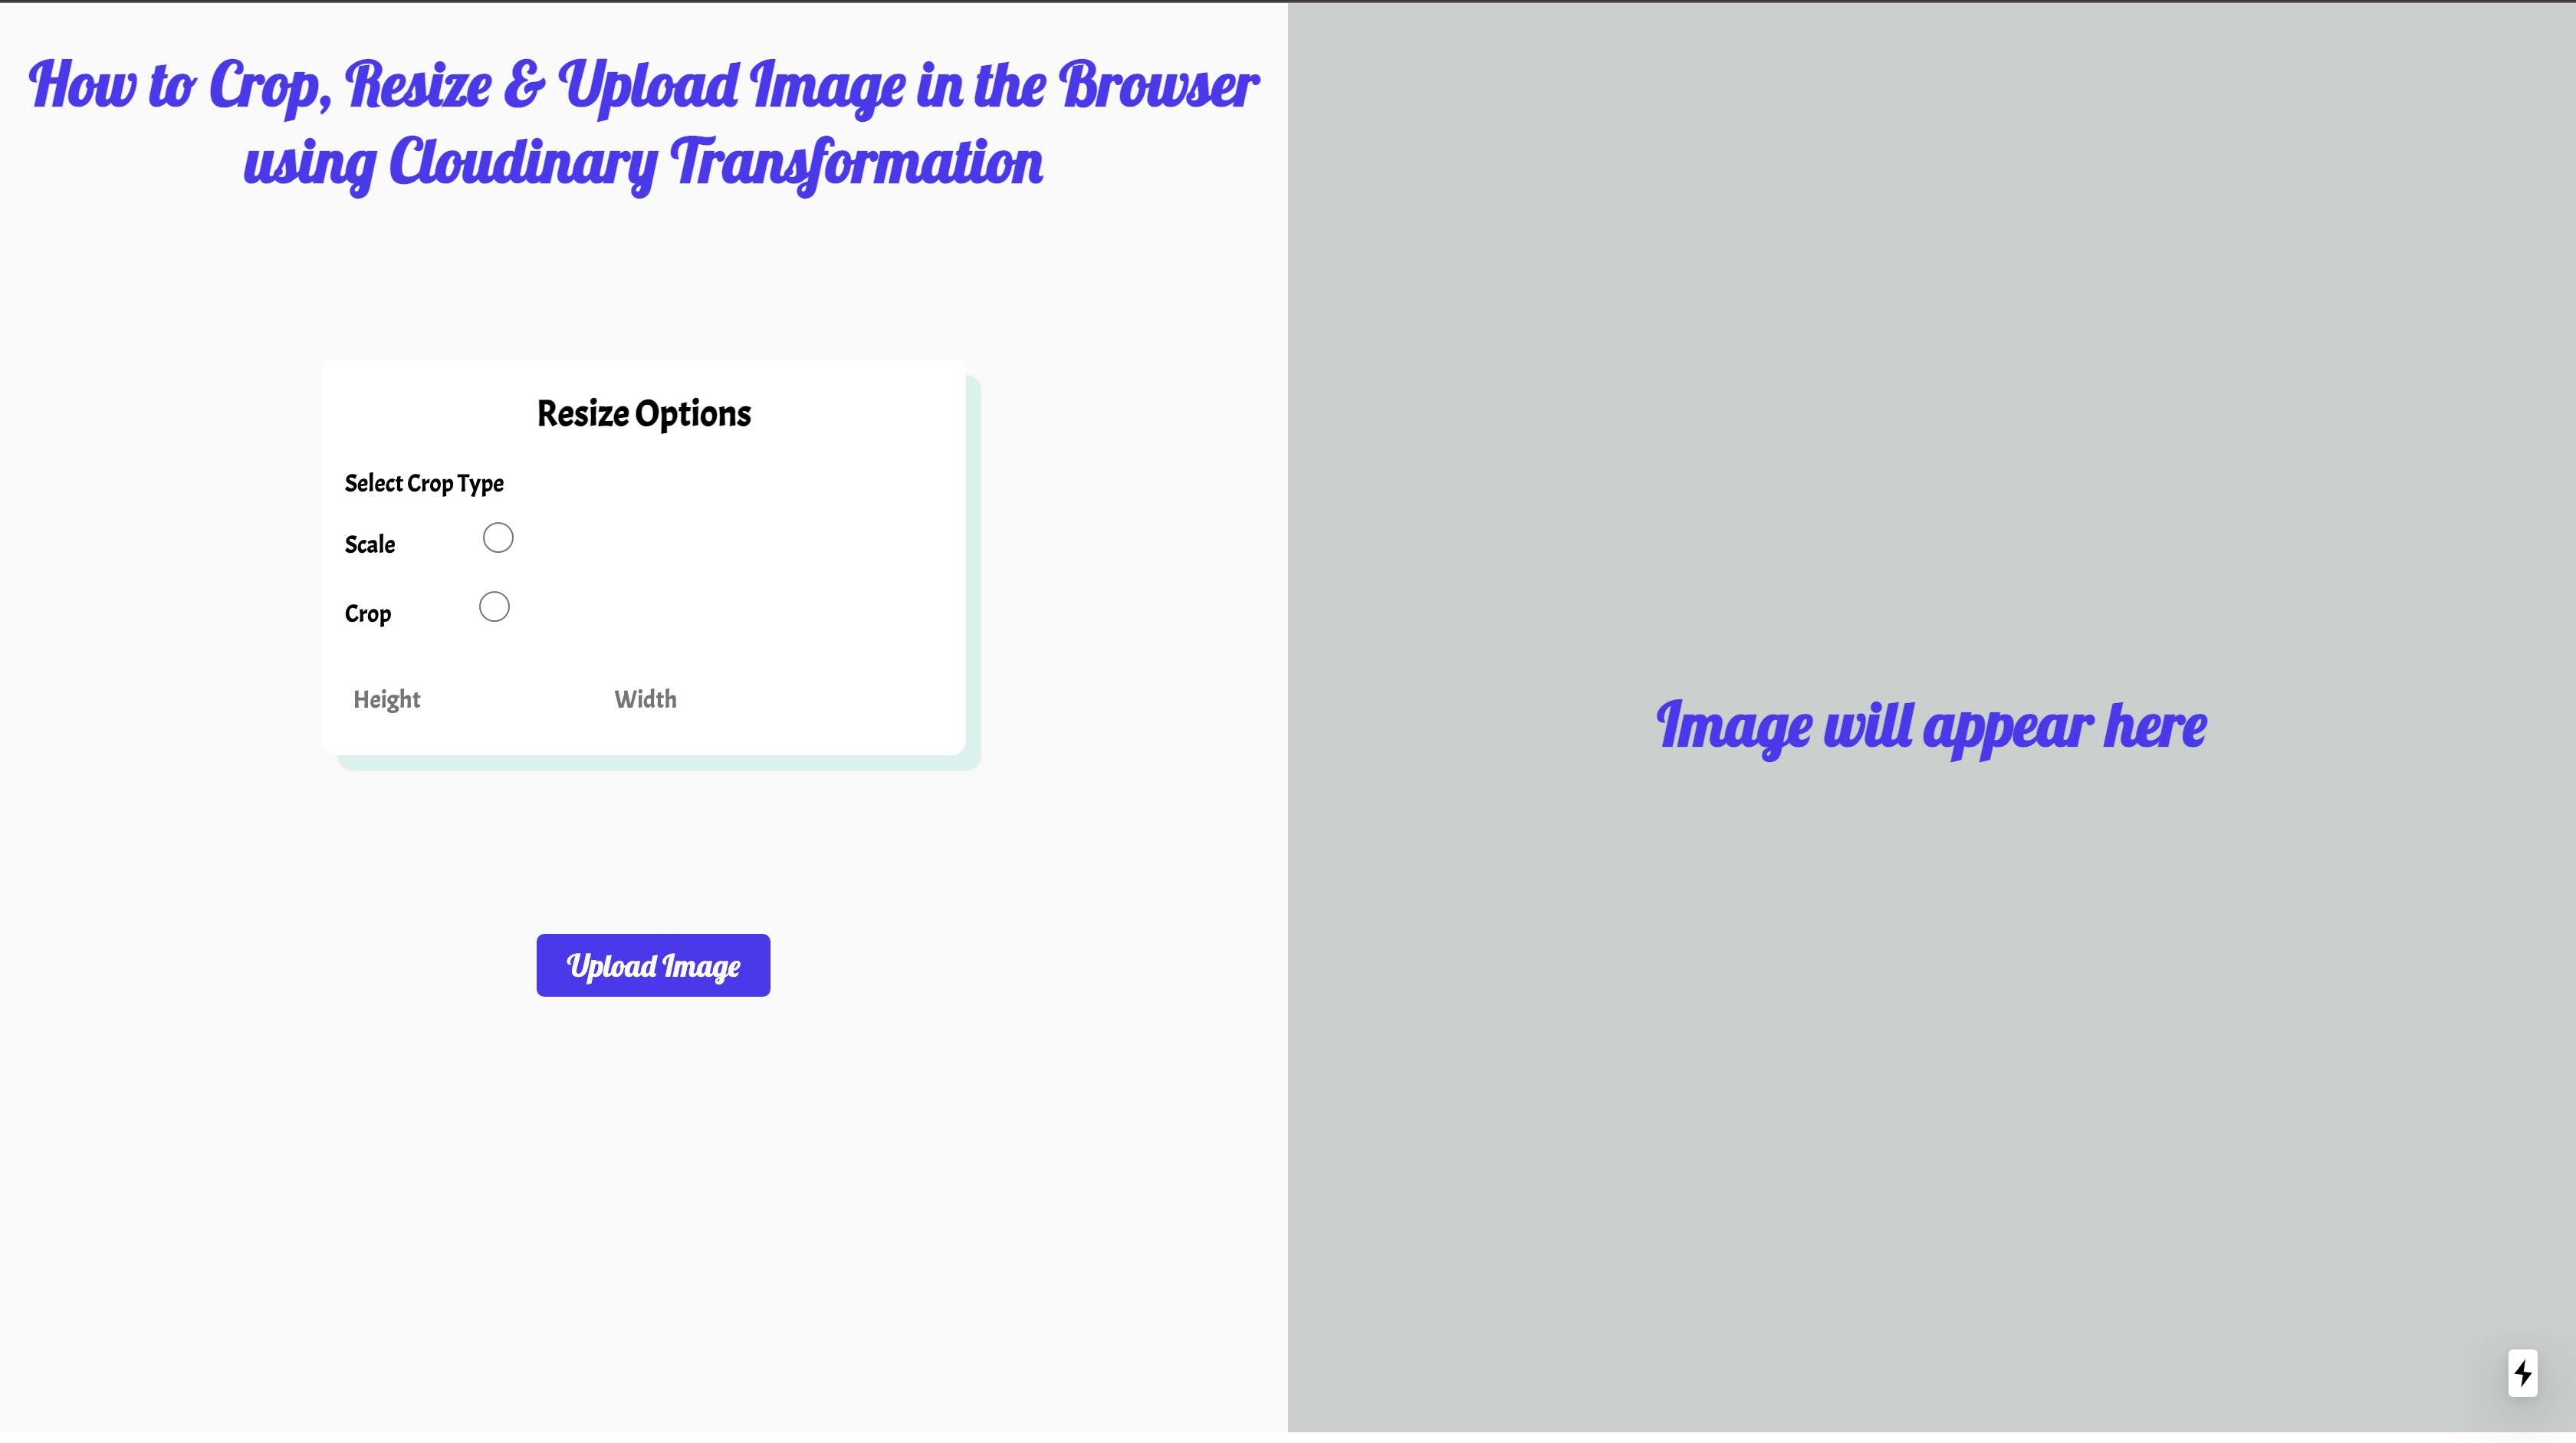 How to Upload, Crop, & Resize Image in the Browser in Next.js